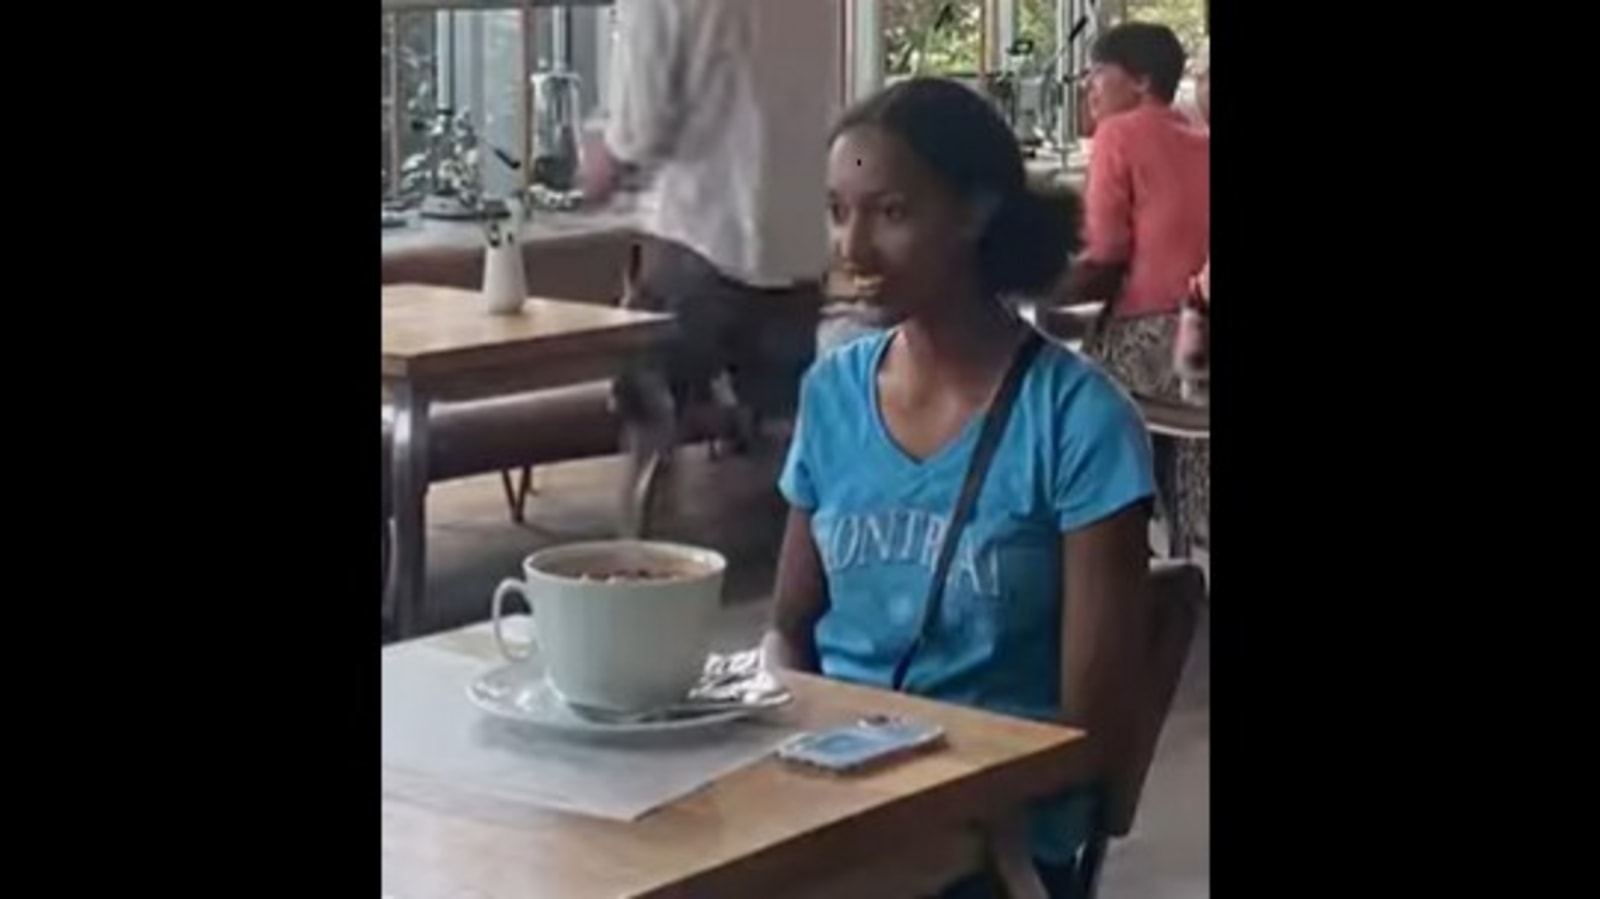 https://images.hindustantimes.com/img/2022/02/23/1600x900/Barista_sends_huge_cup_with_coffee_to_customer_as_a_prank_Watch_her_reaction_1645608349750_1645608369005.png